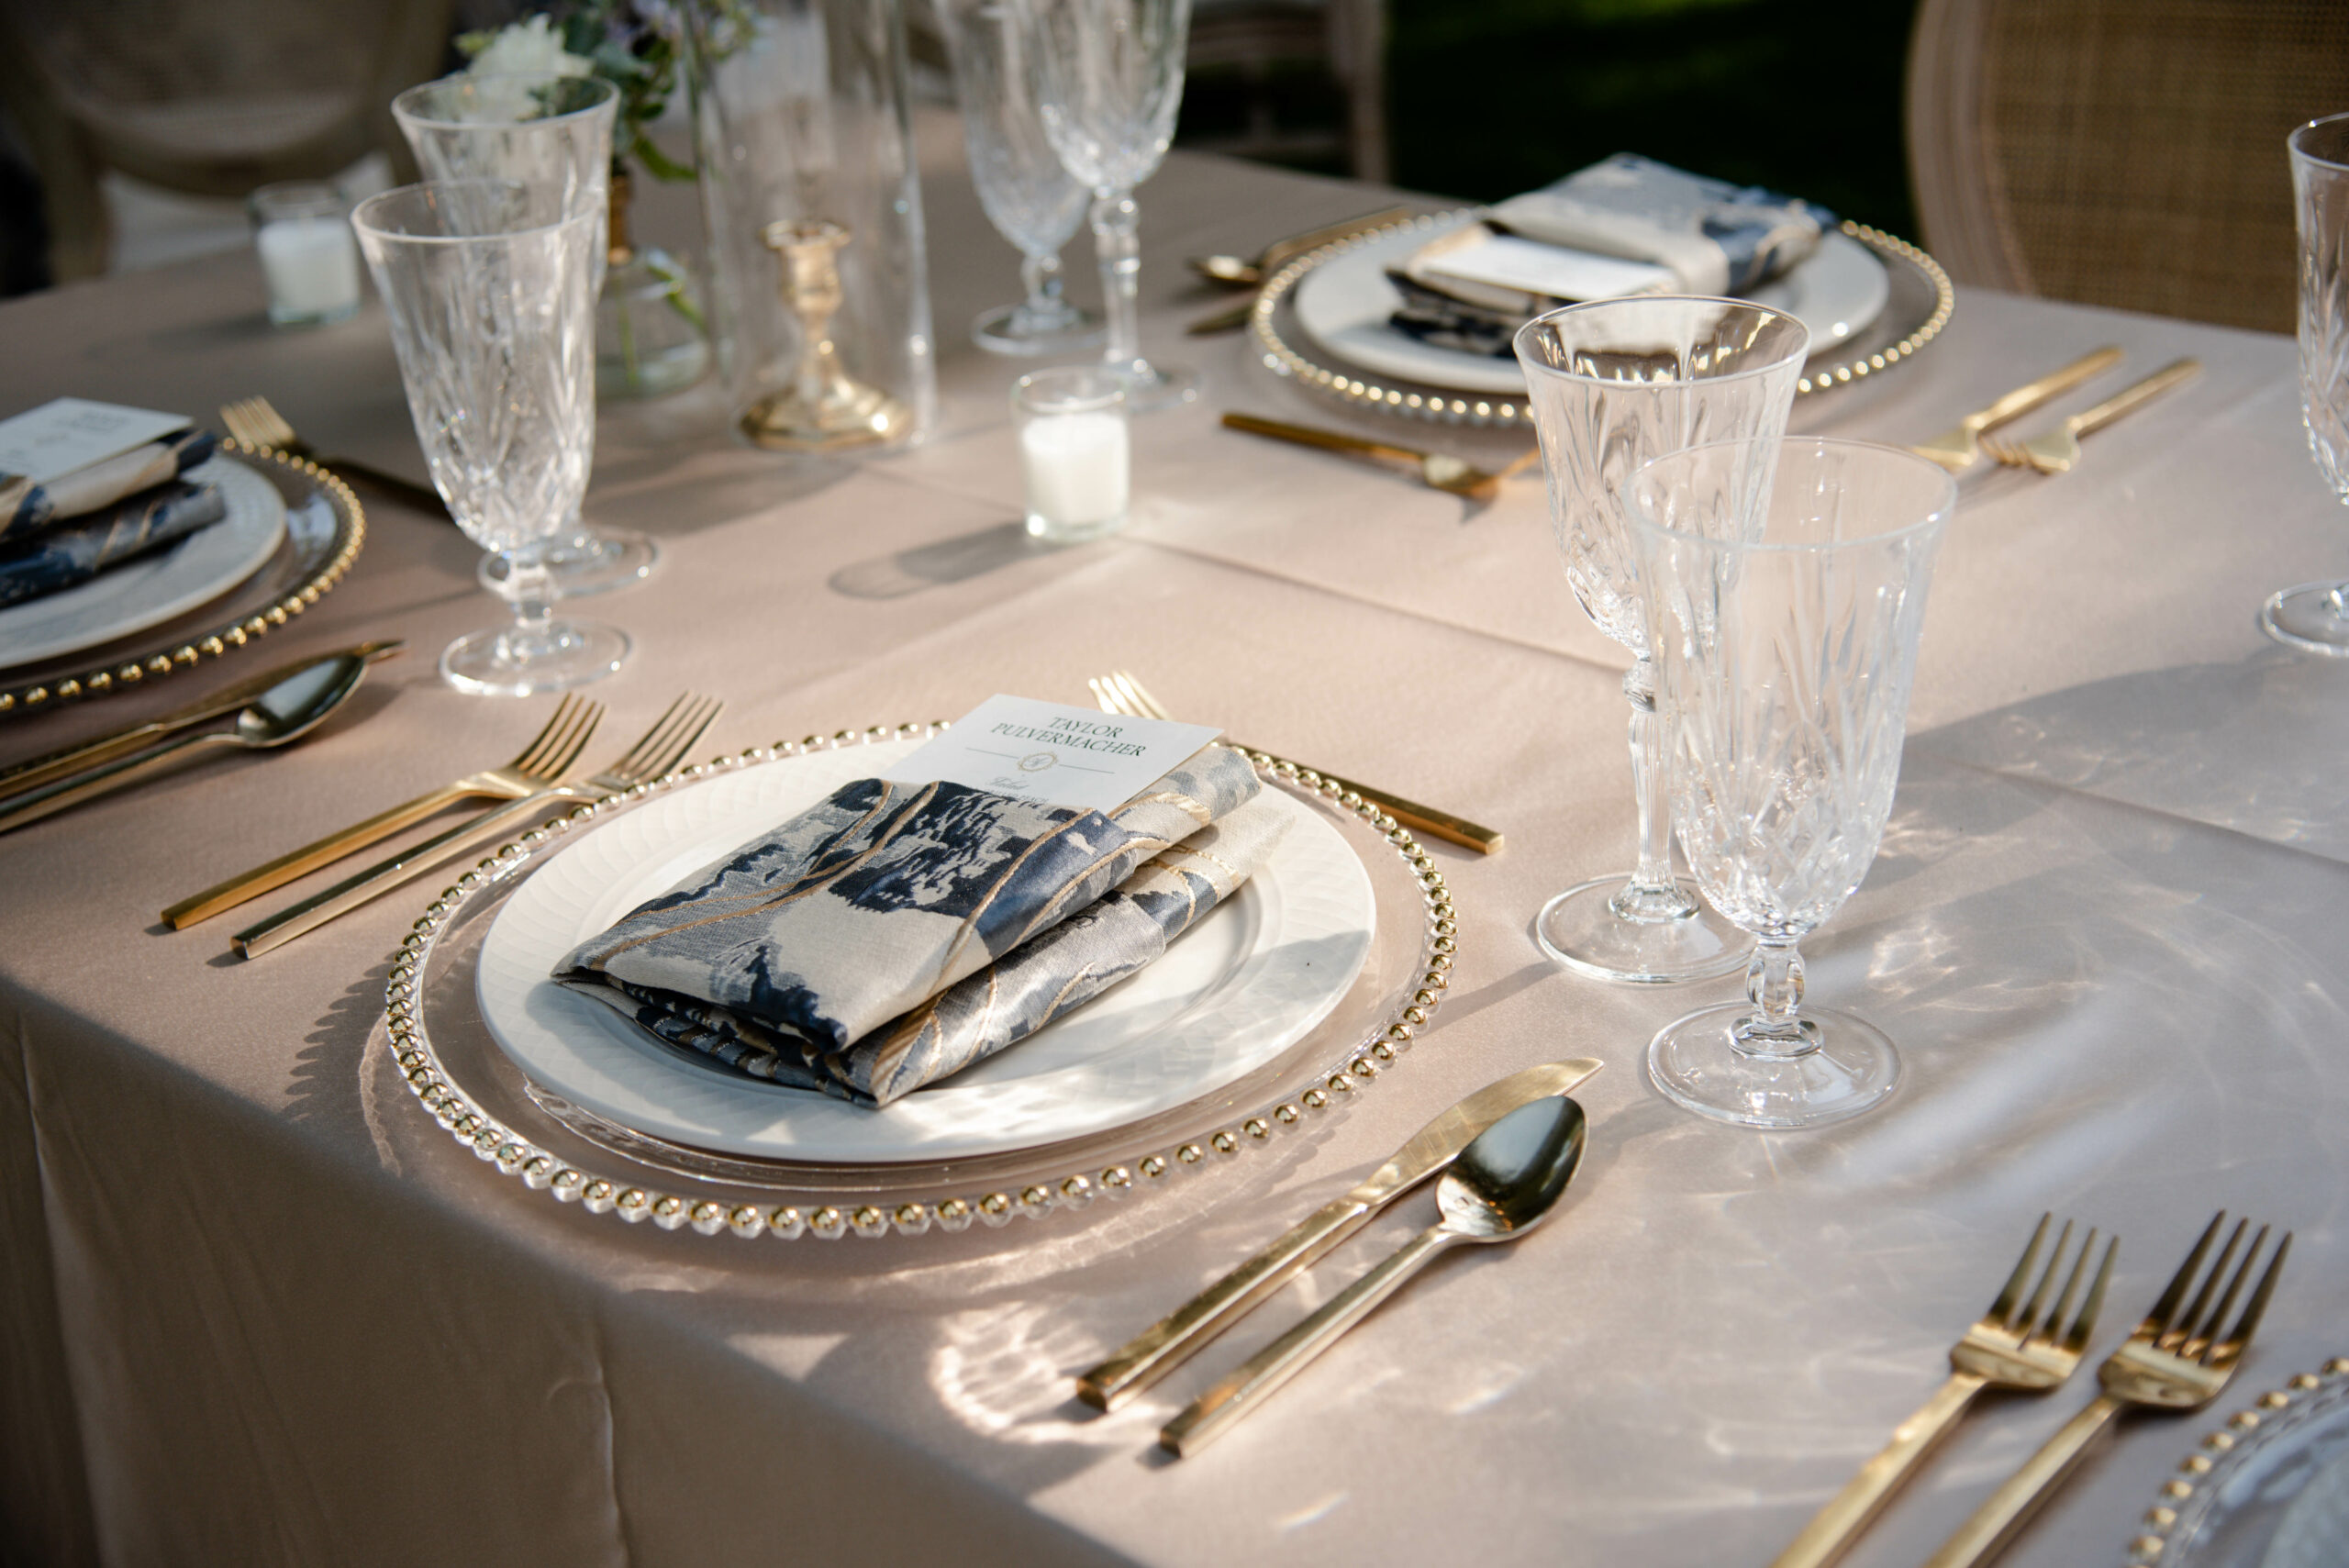 Gold silverware and dinnerware rentals set at a table for a wedding dinner reception, with name tags for each guest.